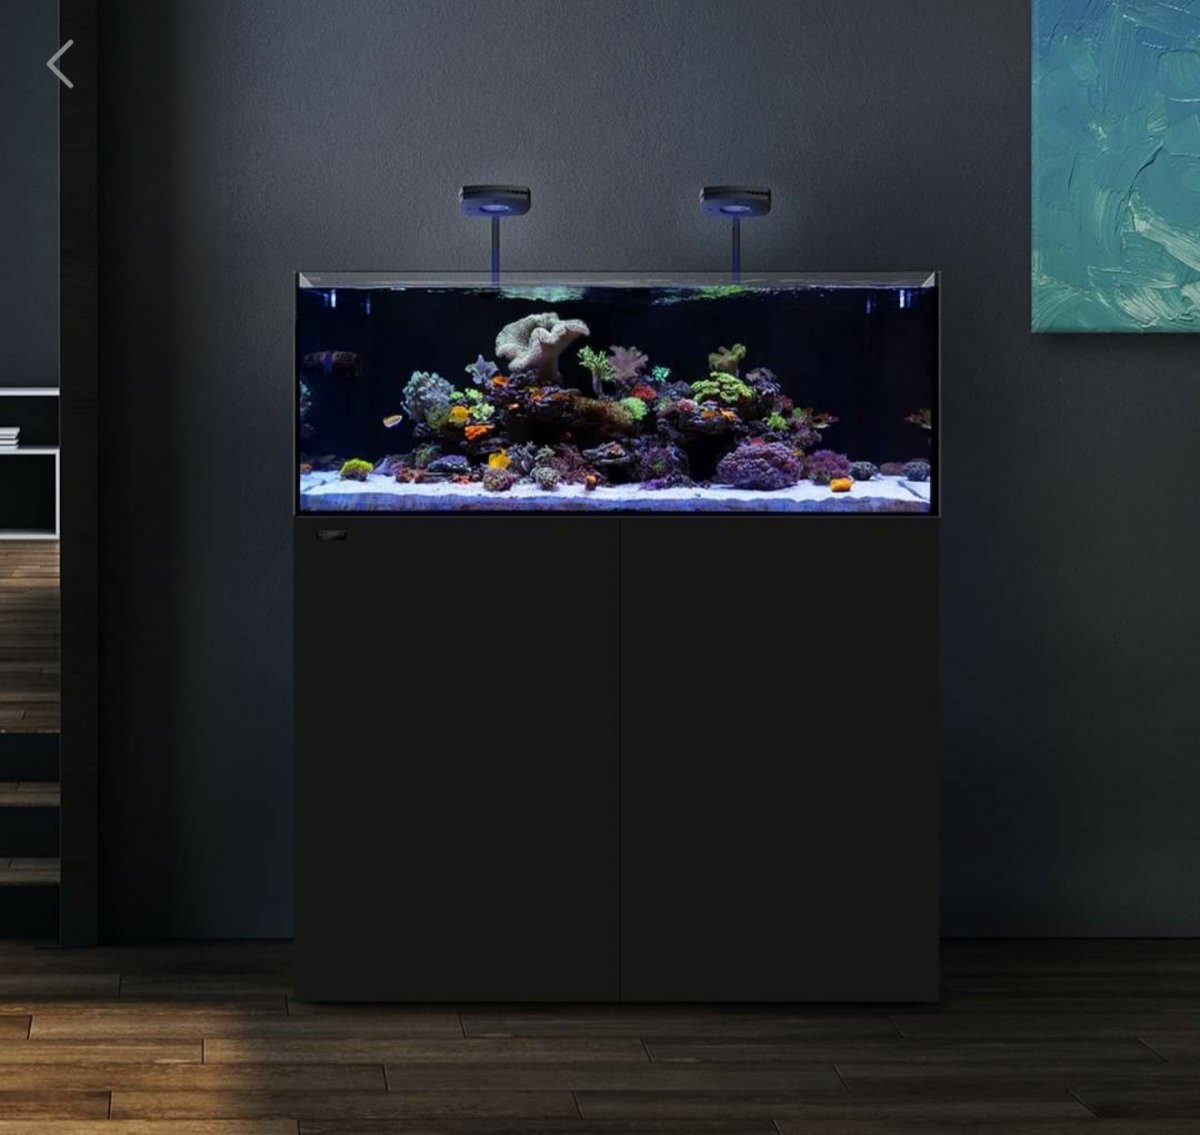 How to make the background Pitch Black like this? | REEF2REEF Saltwater and  Reef Aquarium Forum